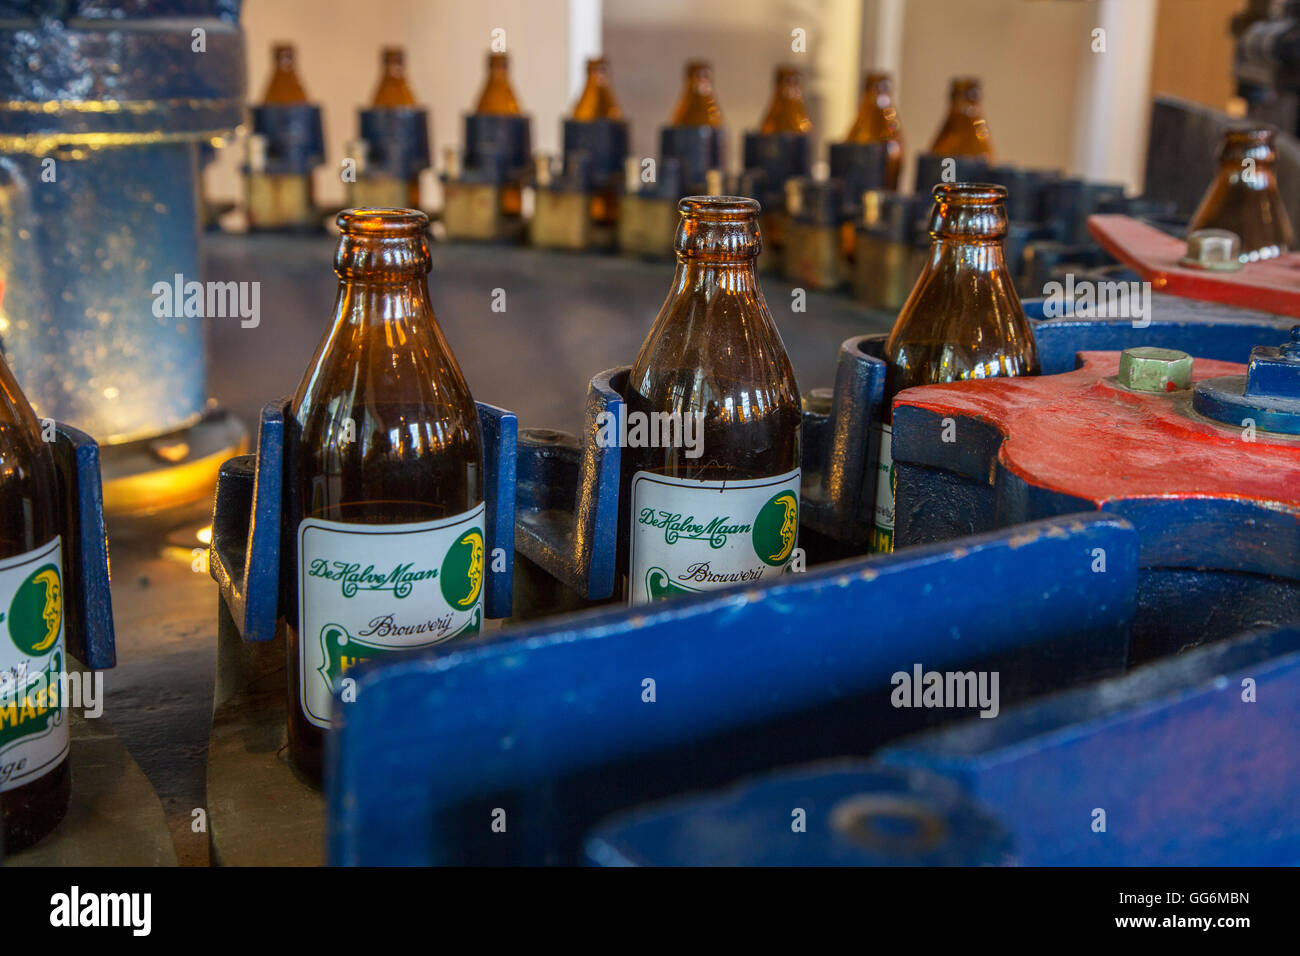 Beer bottles on the assembly line of Brouwerij Henri Maes, Belgian brewery at Bruges, Belgium Stock Photo